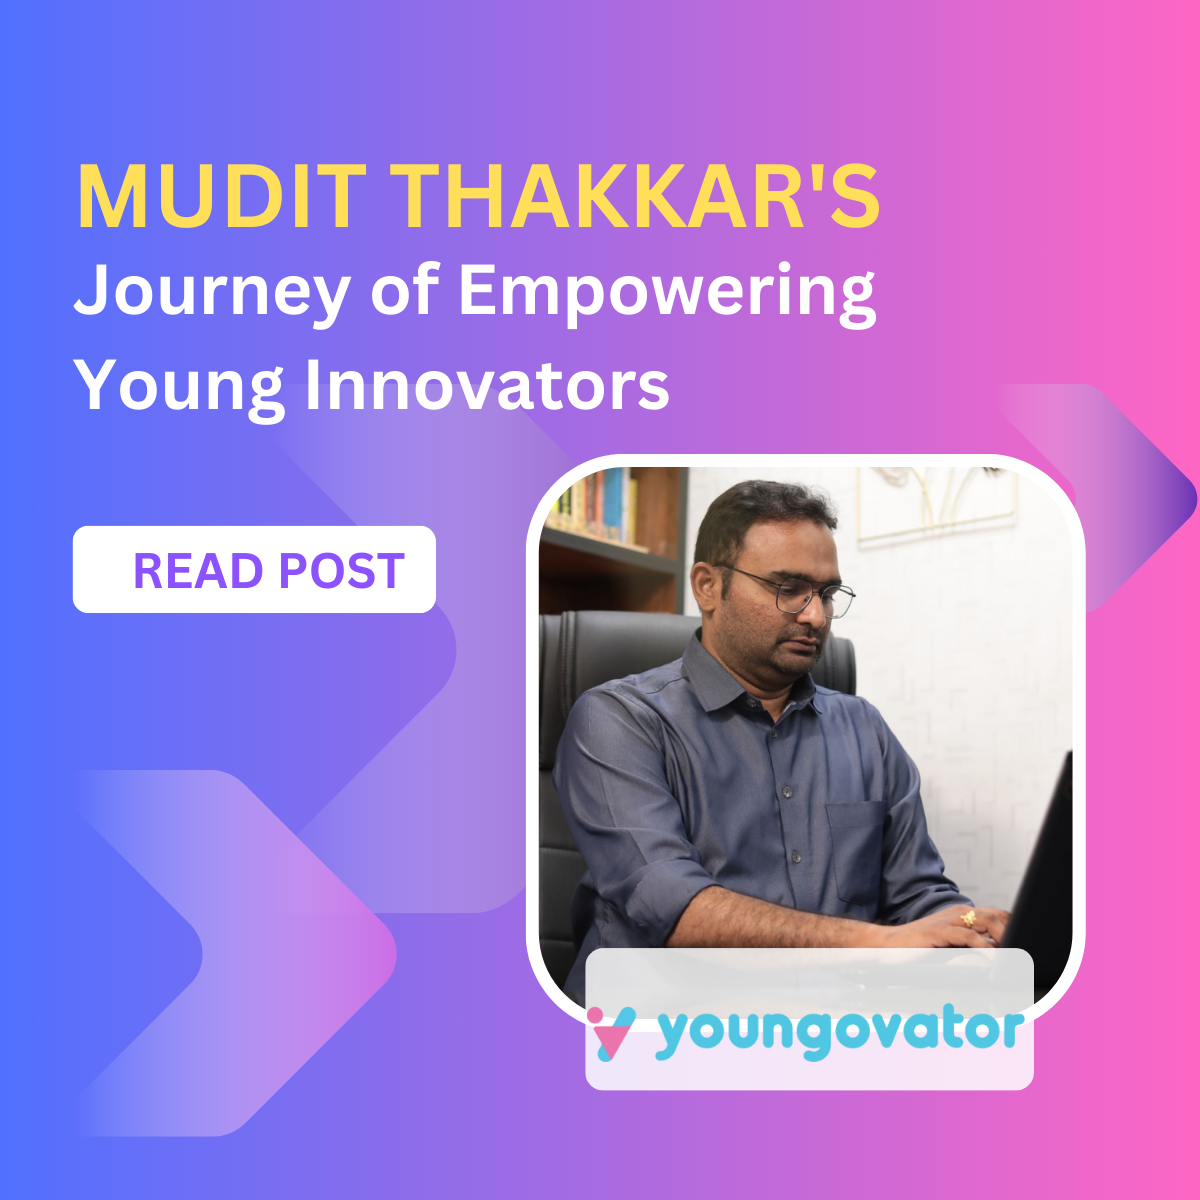 Journey of Empowering Young Innovators